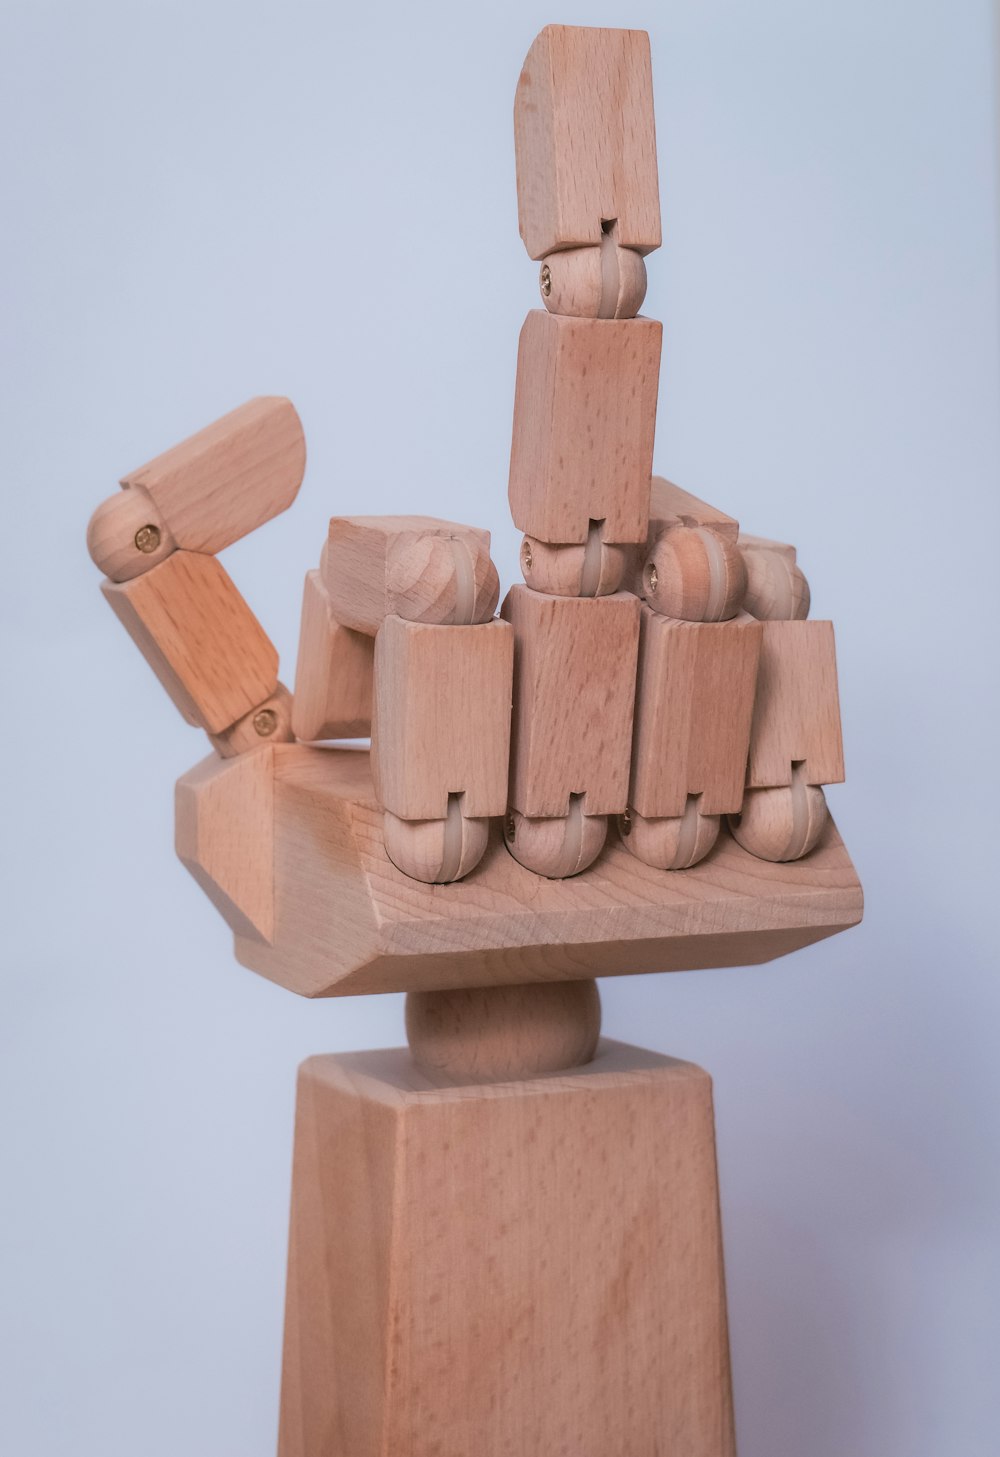 a wooden sculpture of a stack of wooden blocks